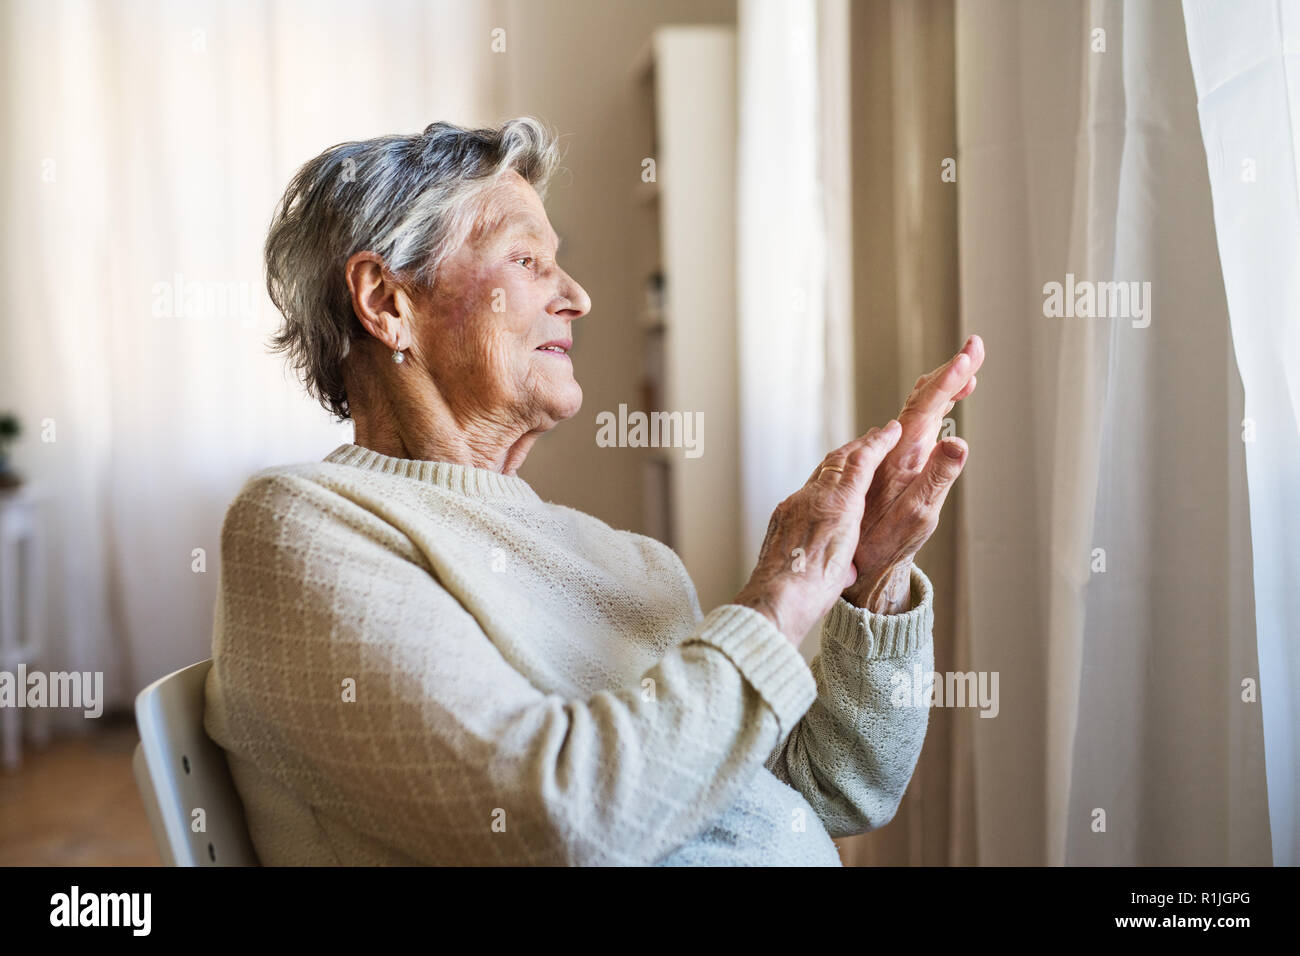 A portrait of a senior woman sitting at home, looking out of a window. Stock Photo